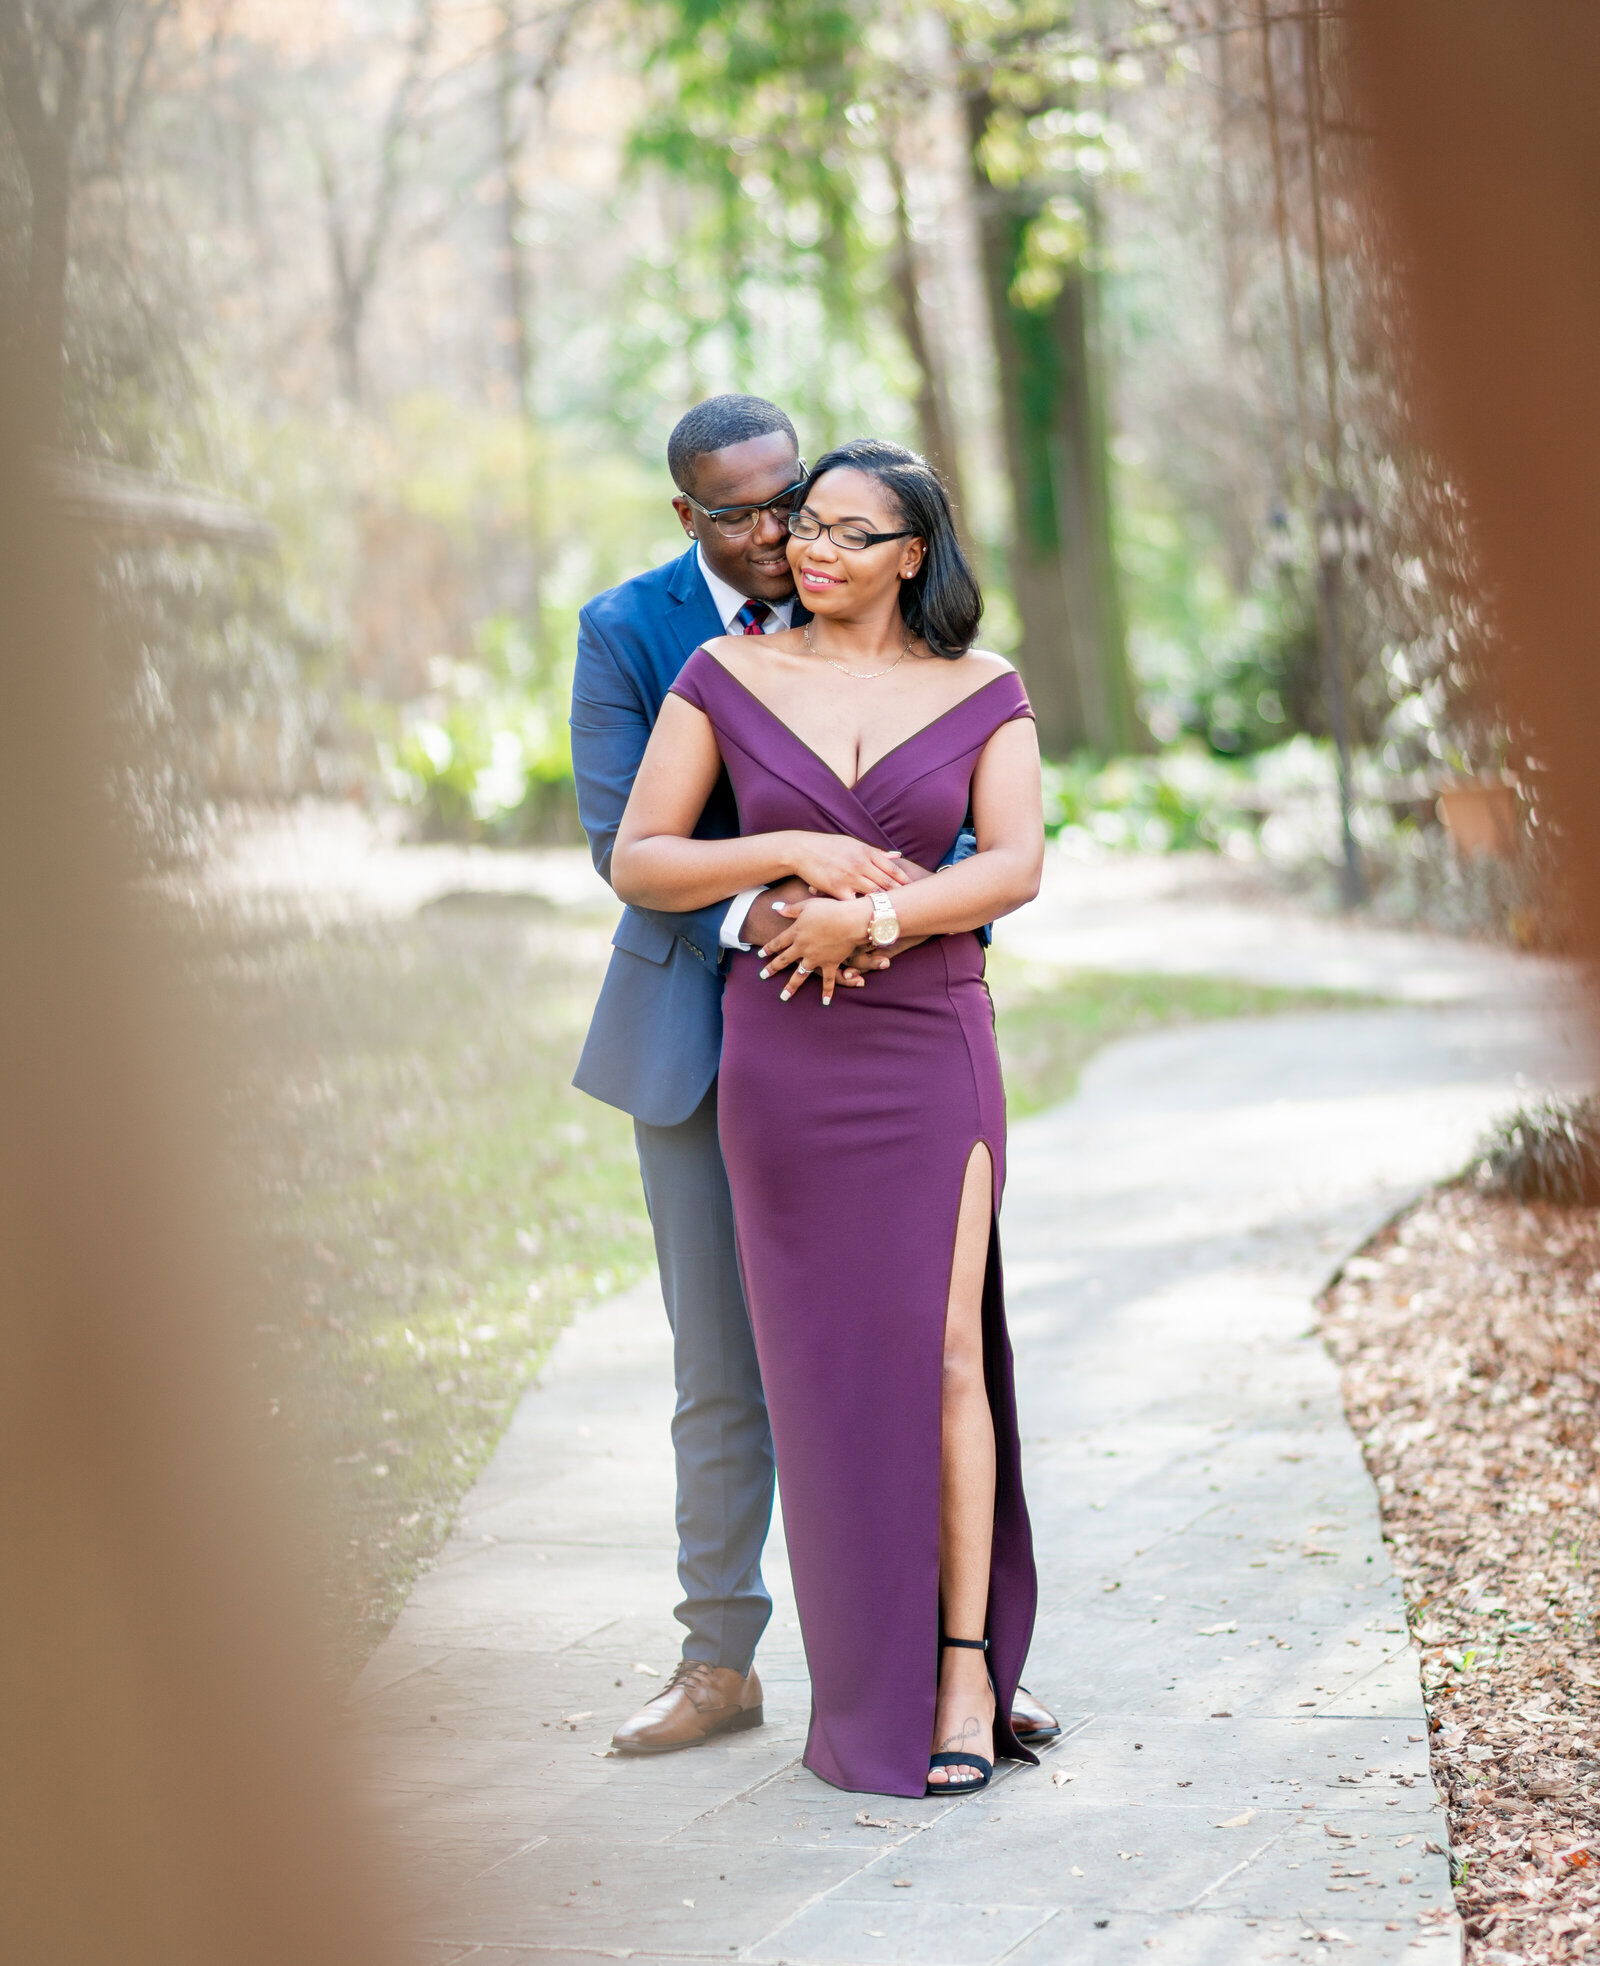 Melson ENgagement session in atlanta georgia